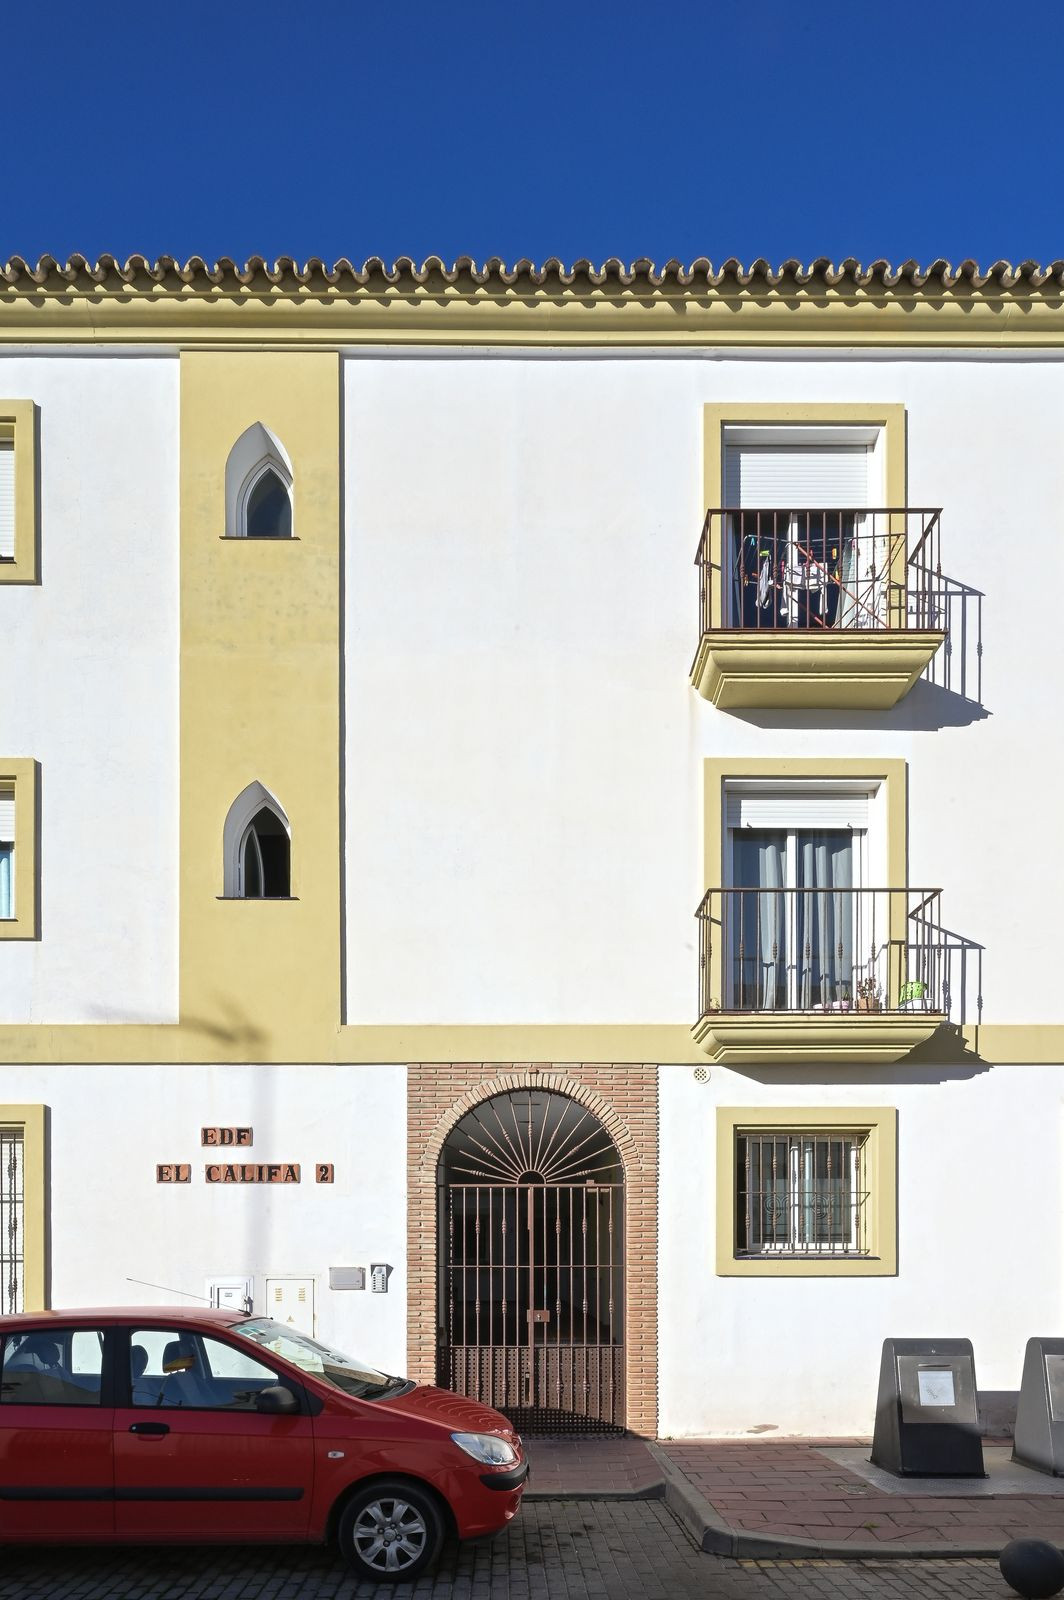 						Apartment  Ground Floor
													for sale 
																			 in Casares
					